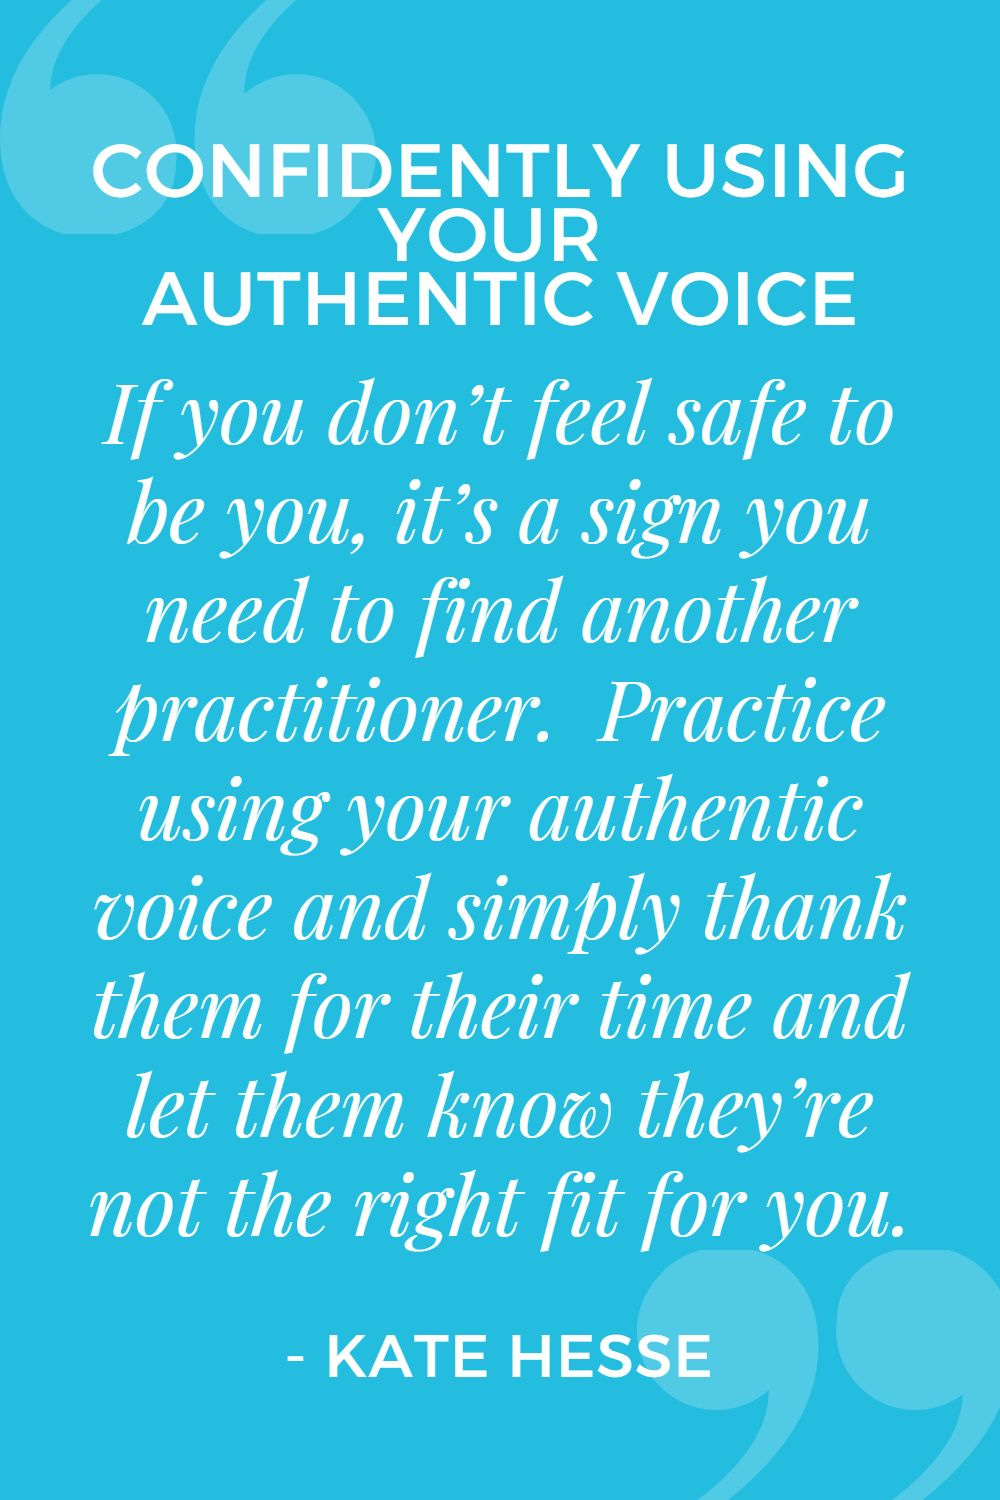 If you don't feel safe to be you, it's a sign you need to find another practitioner. Practice using your authentic voice and simply thank them for their time and let them know they're not the right fit for you.